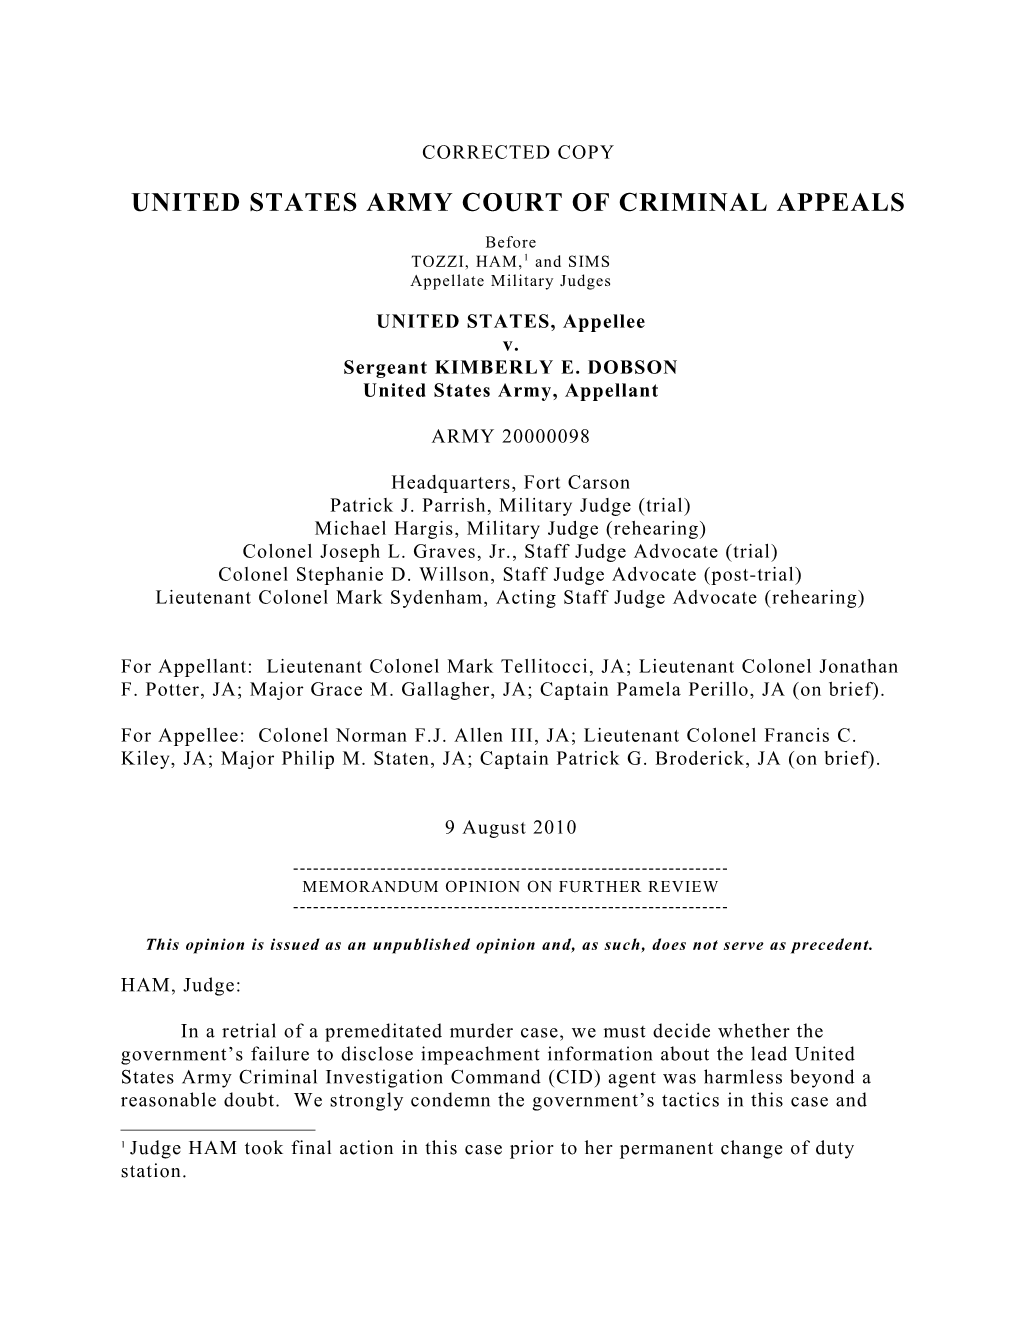 United States Army Court of Criminal Appeals s2